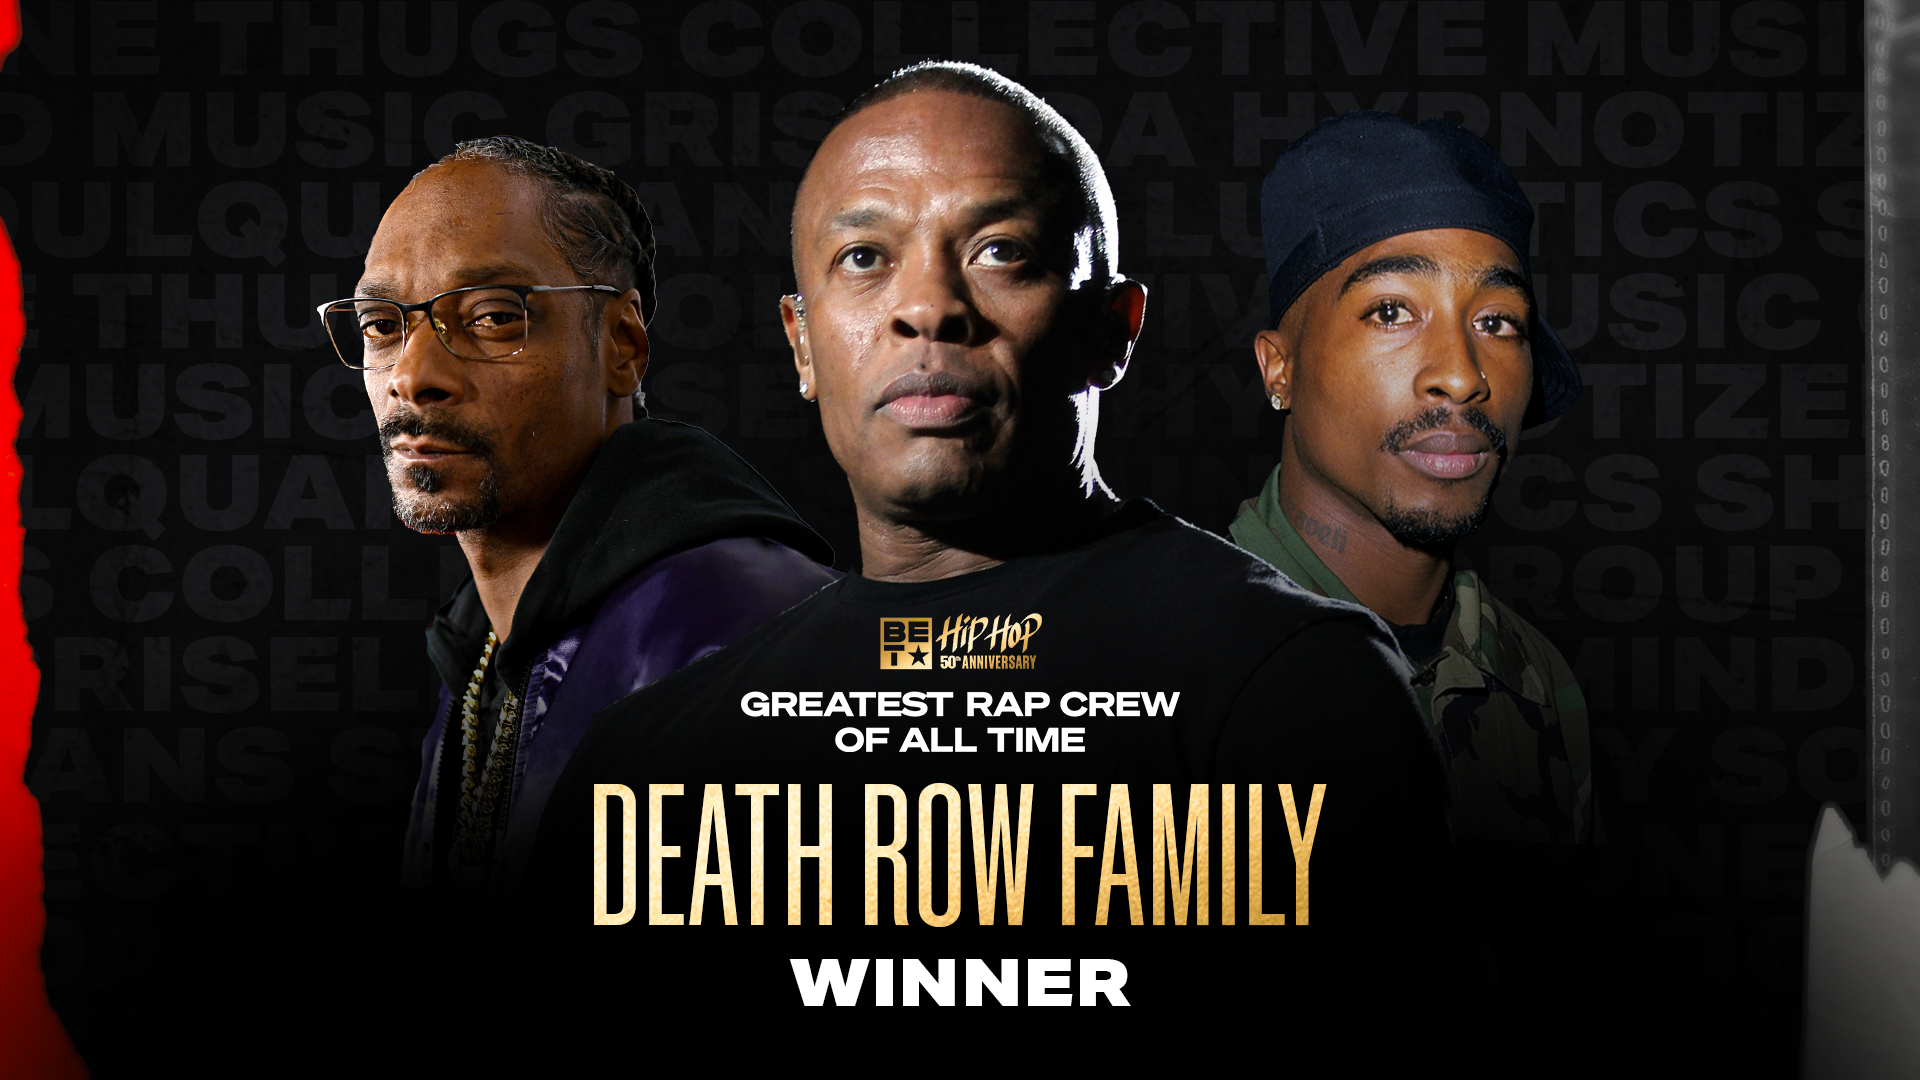 Death Row Family Wins the Greatest Rap Crew of All Time Tournament